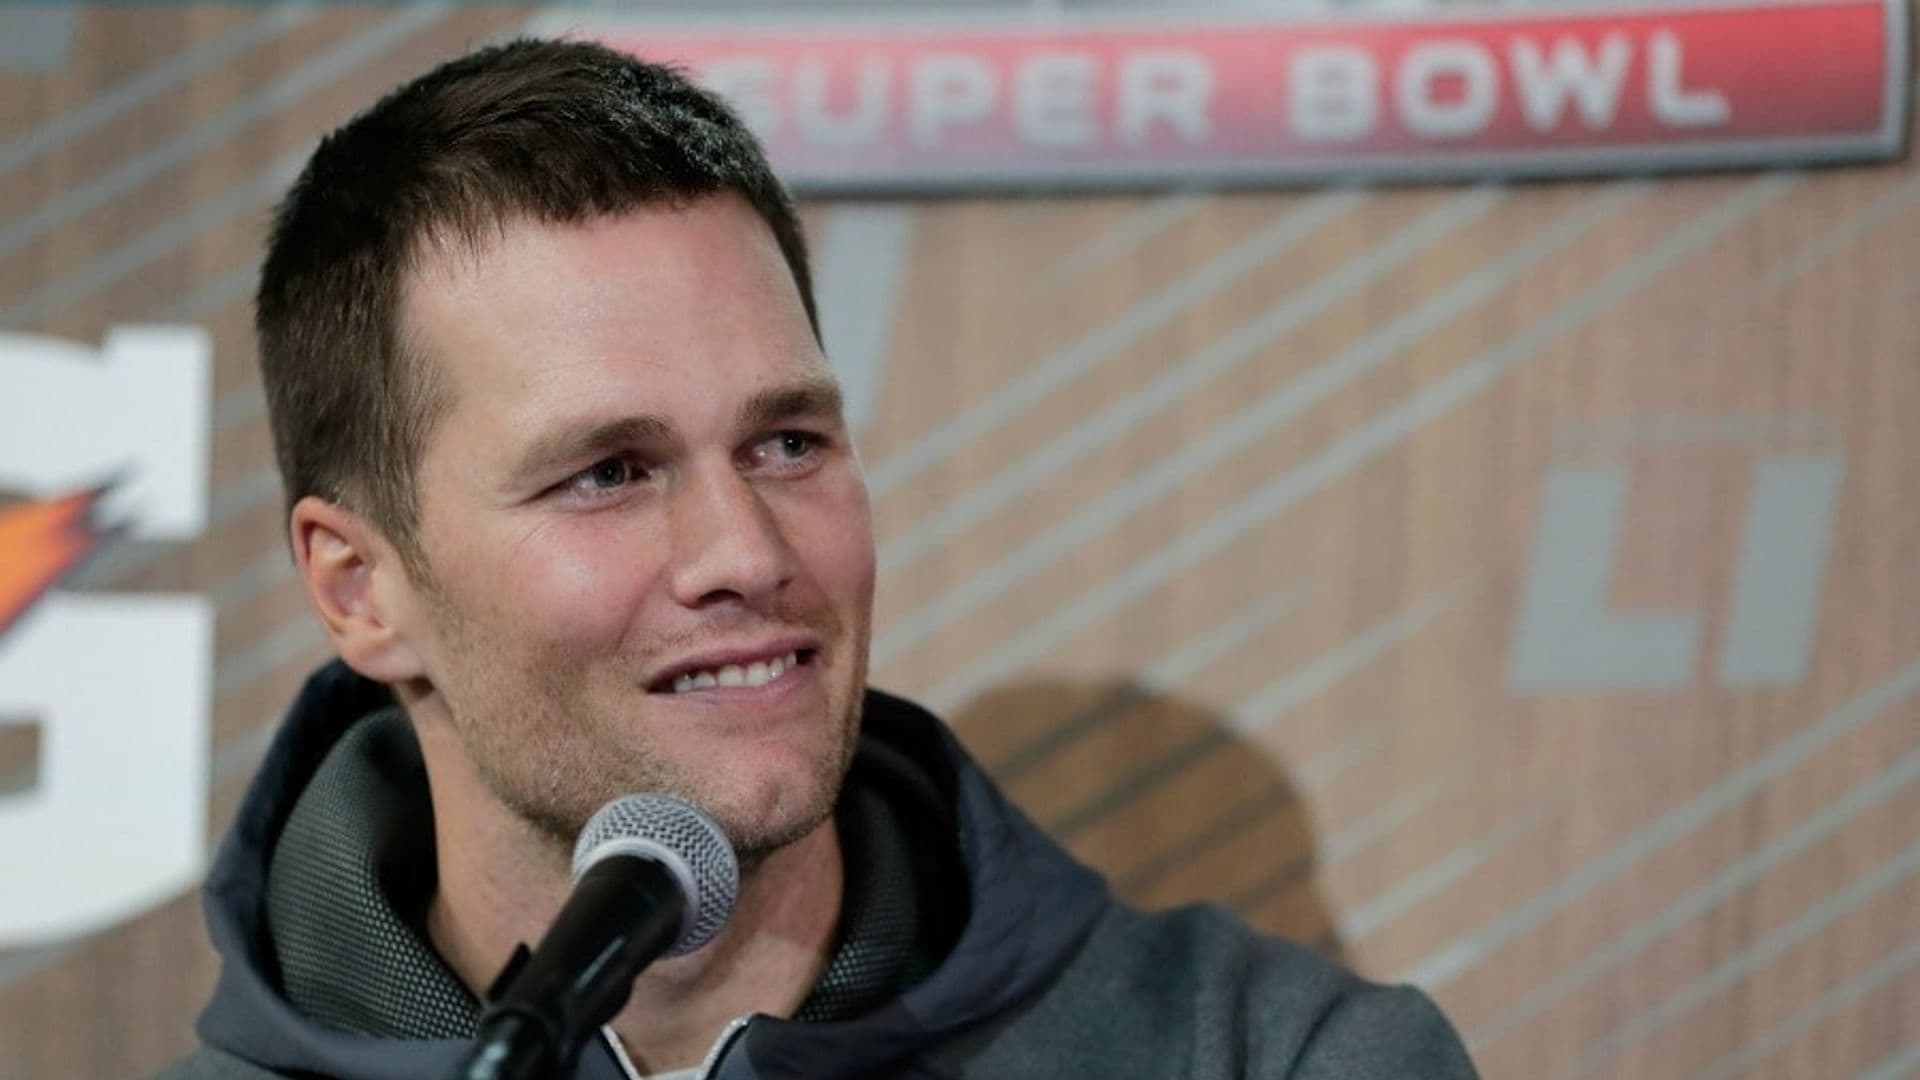 Tom Brady tears up when talking about his father, his hero during pre-Super Bowl press conference